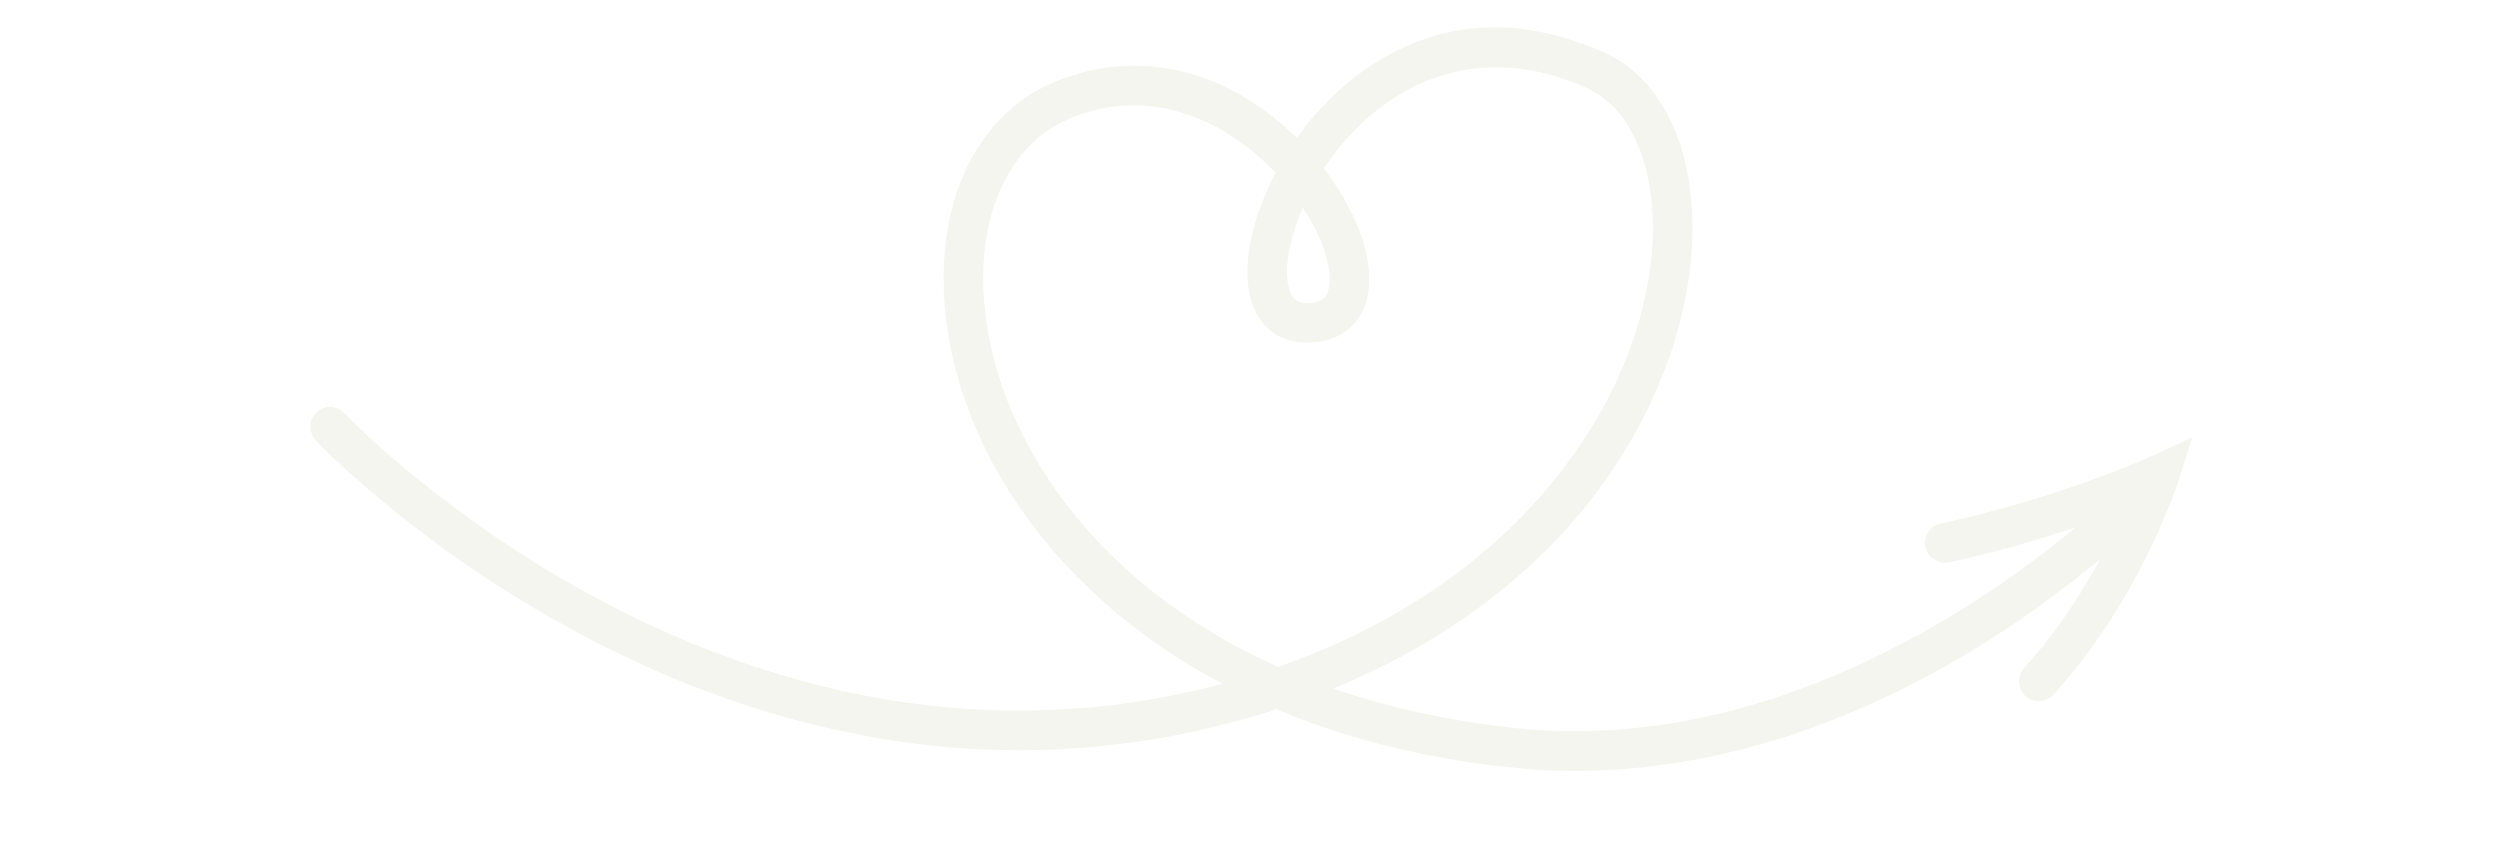 Handdrawn Heart with forward arrow in one stroke. Off White